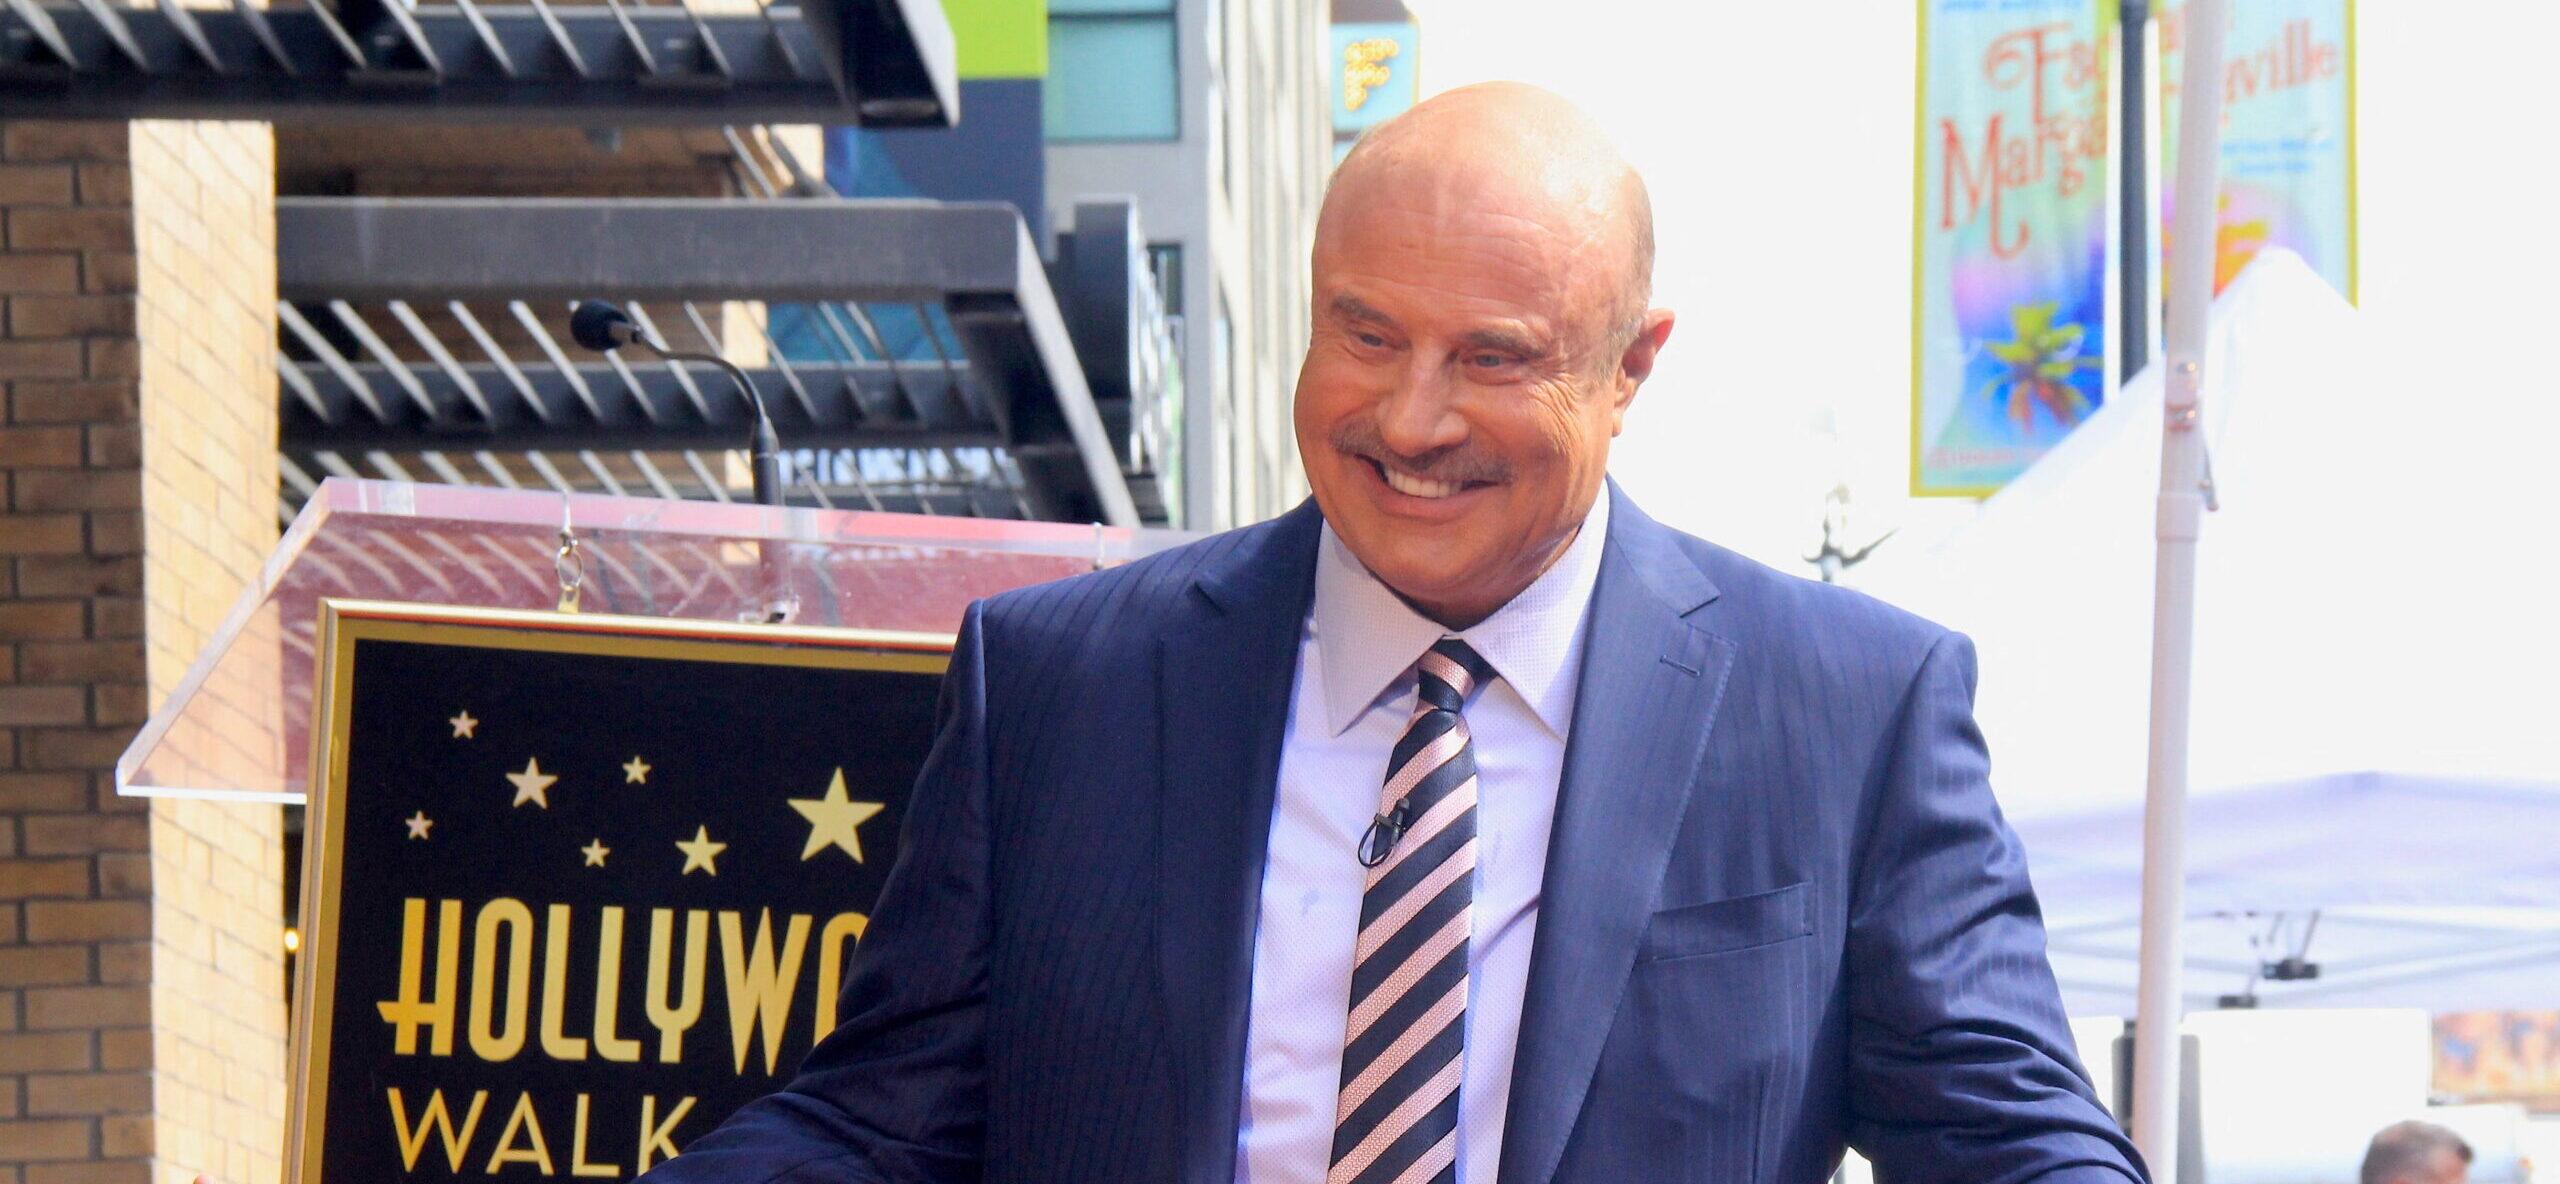 Dr. Phil Sued For Losing Guest’s Only Copy Of Unpublished Domestic Violence Book